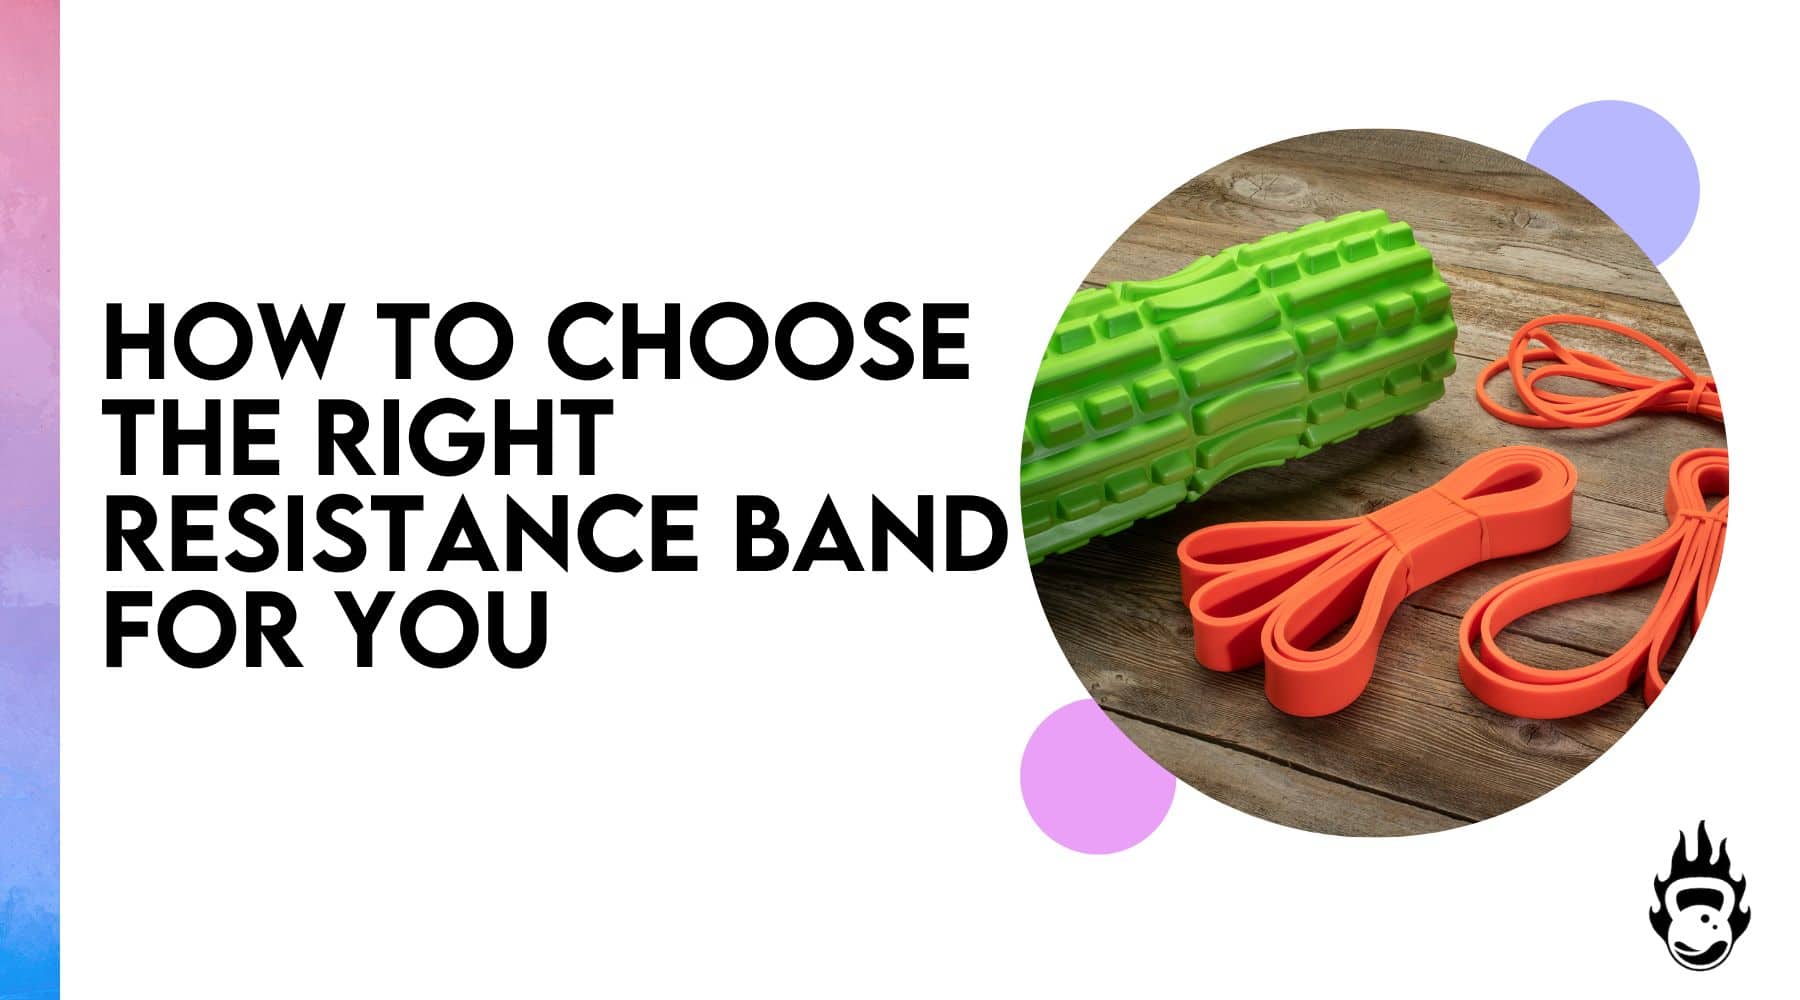 What type of resistance band should I be using?